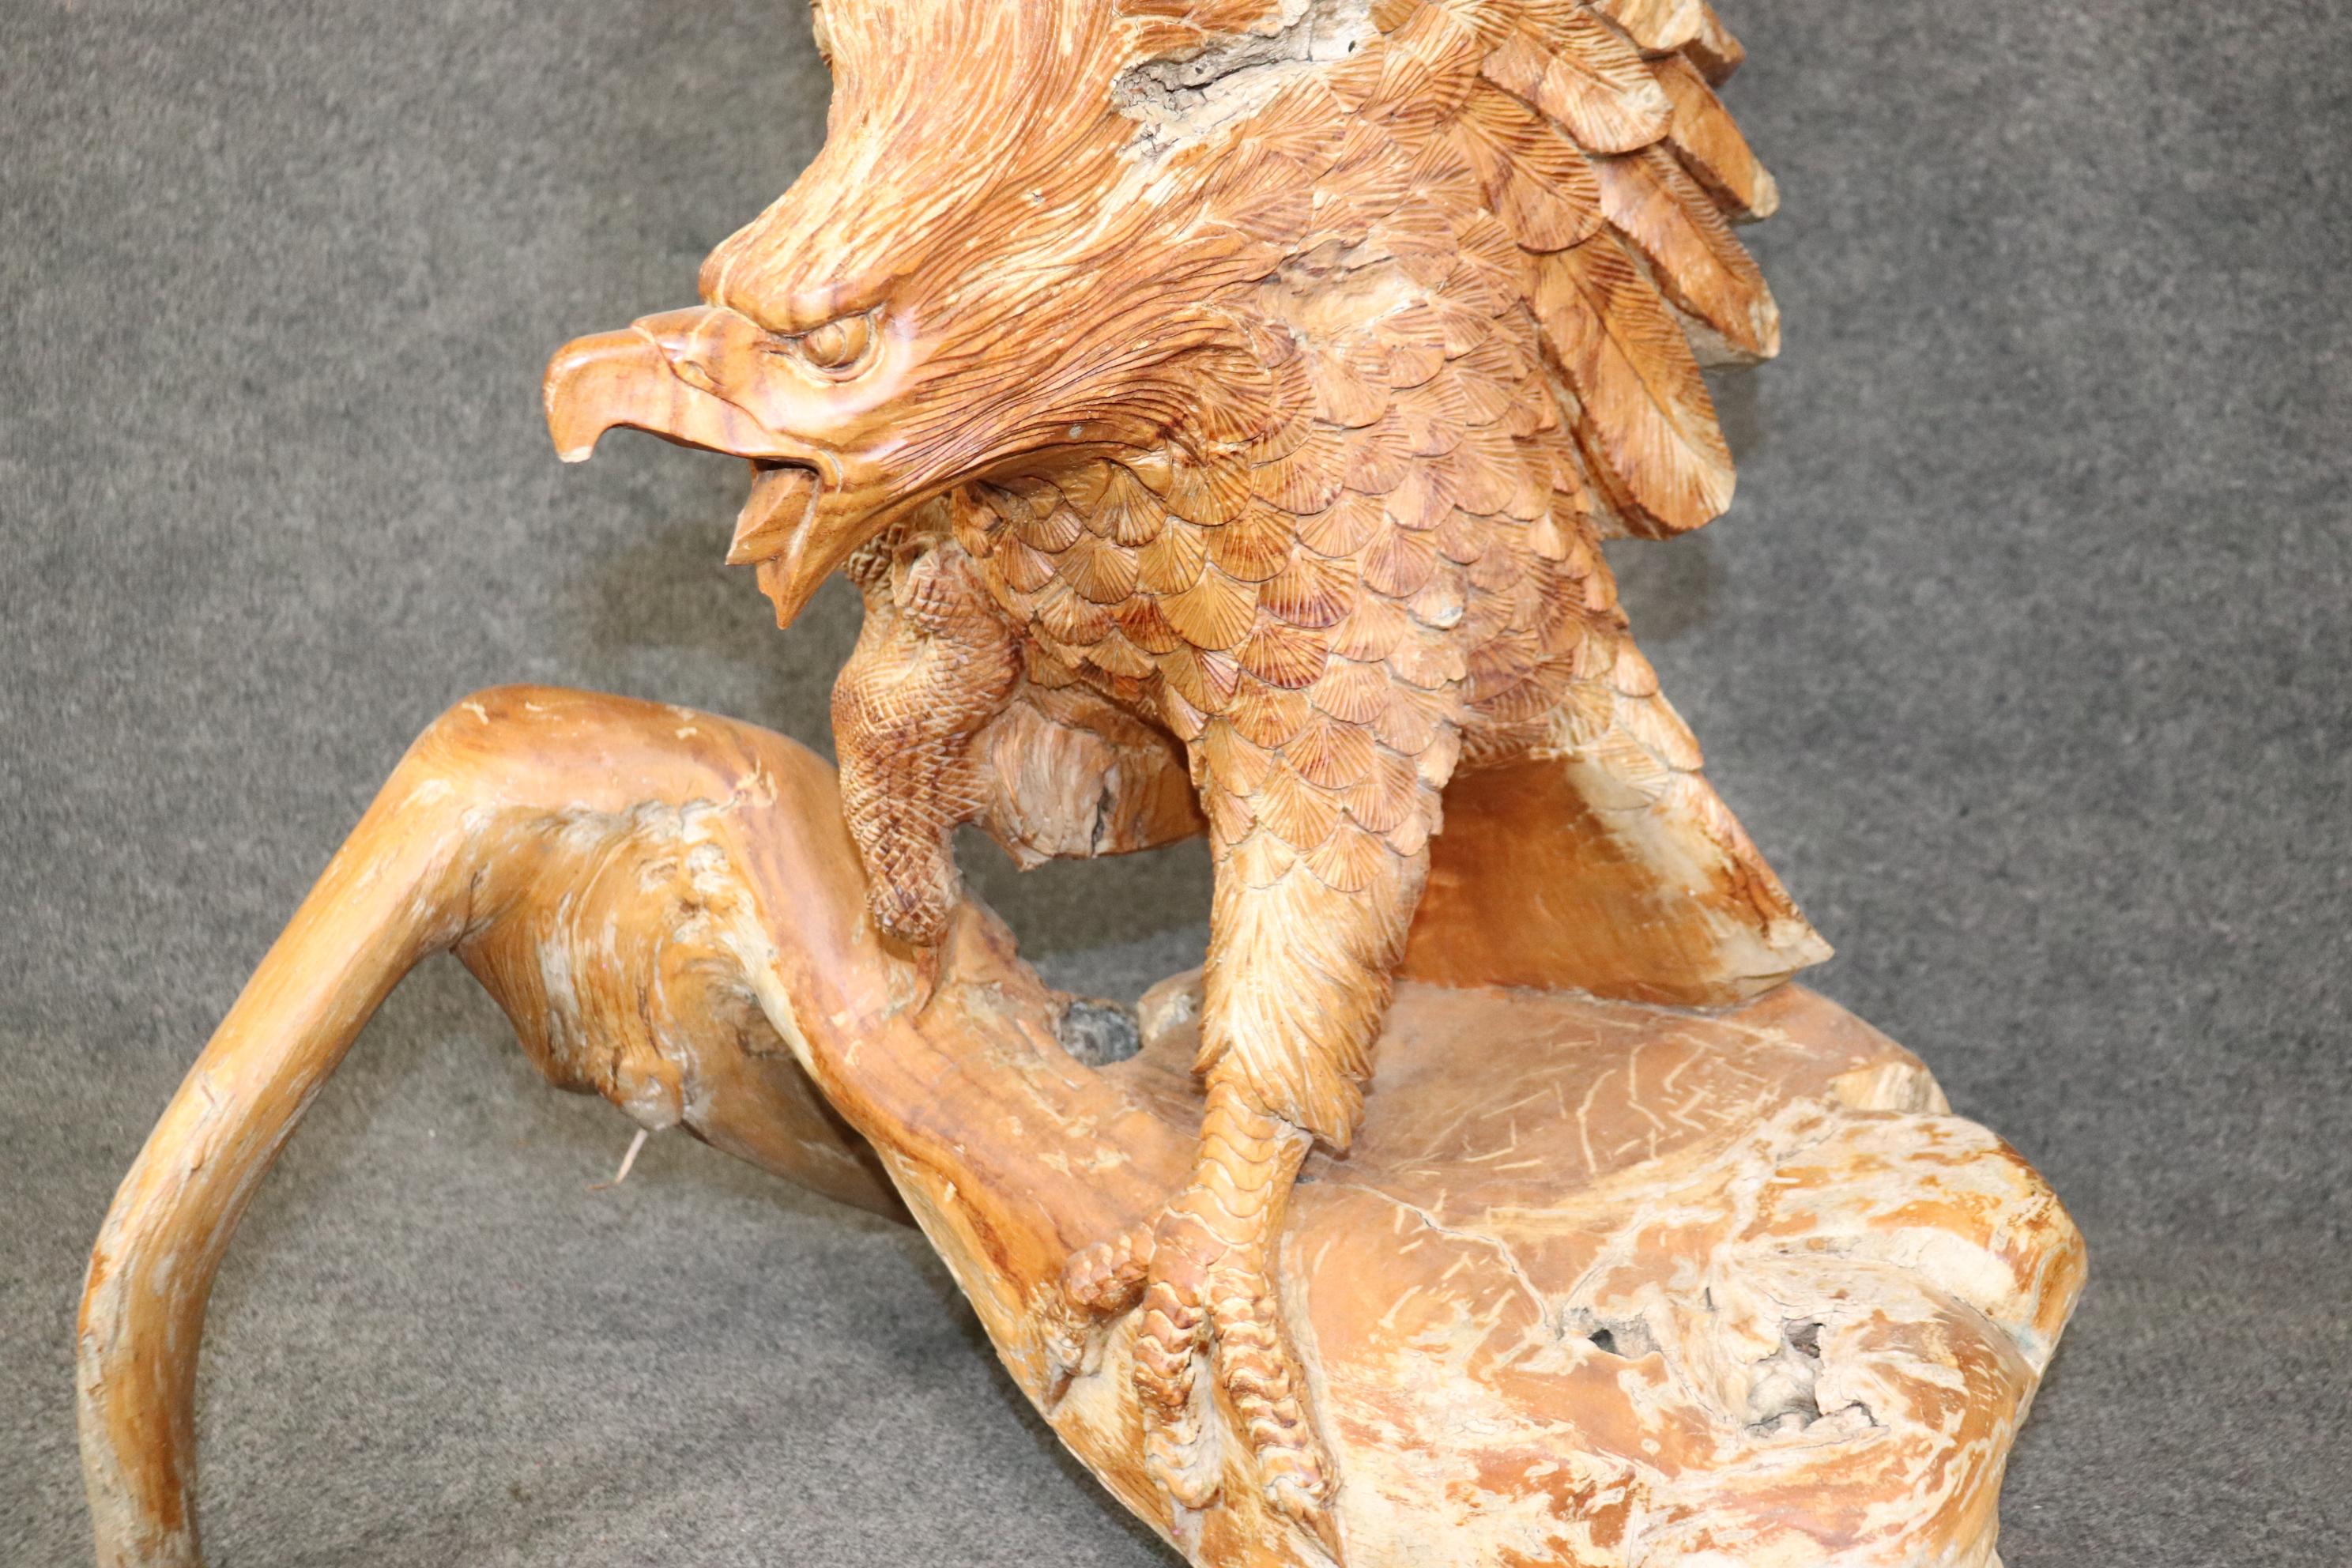 This a single piece of wood, expertly hand-carved in incredible detail with naturalistic carving of feathers, talons, beak and wings. The bald eagle is just landing and appears to be a living bretaing bird but made of walnut. This is an American